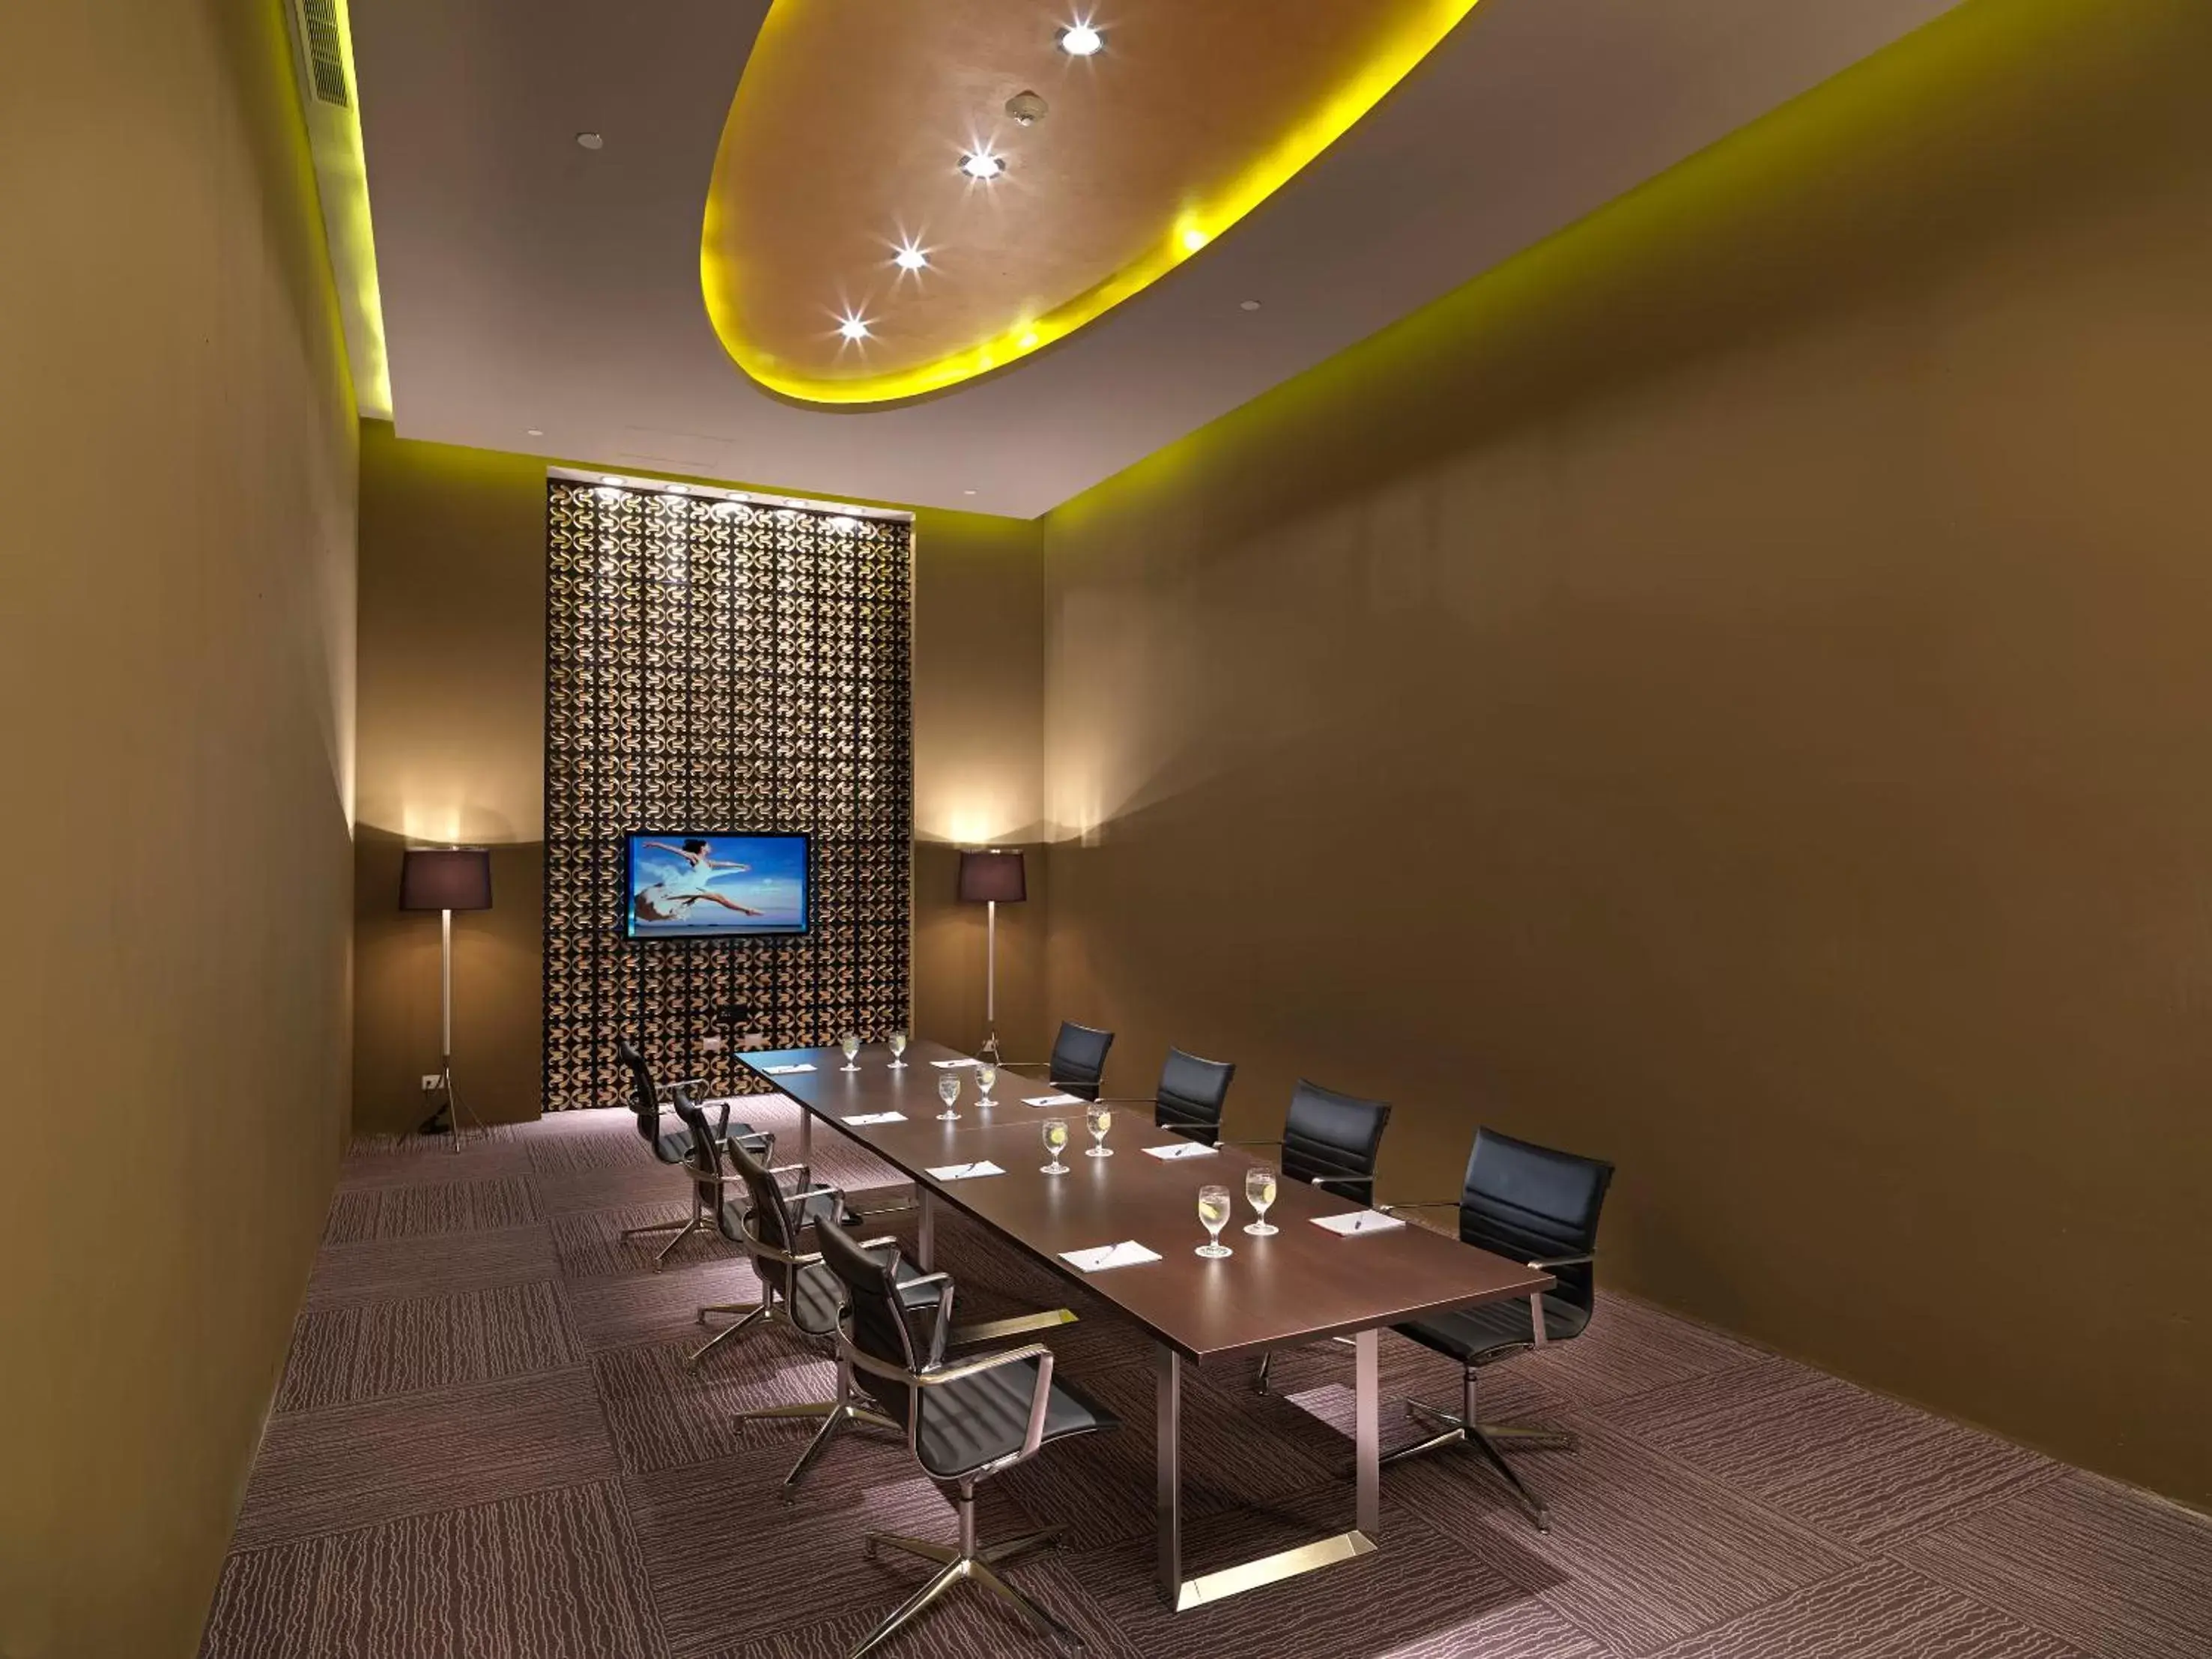 Meeting/conference room in Paradisus Playa del Carmen All Inclusive